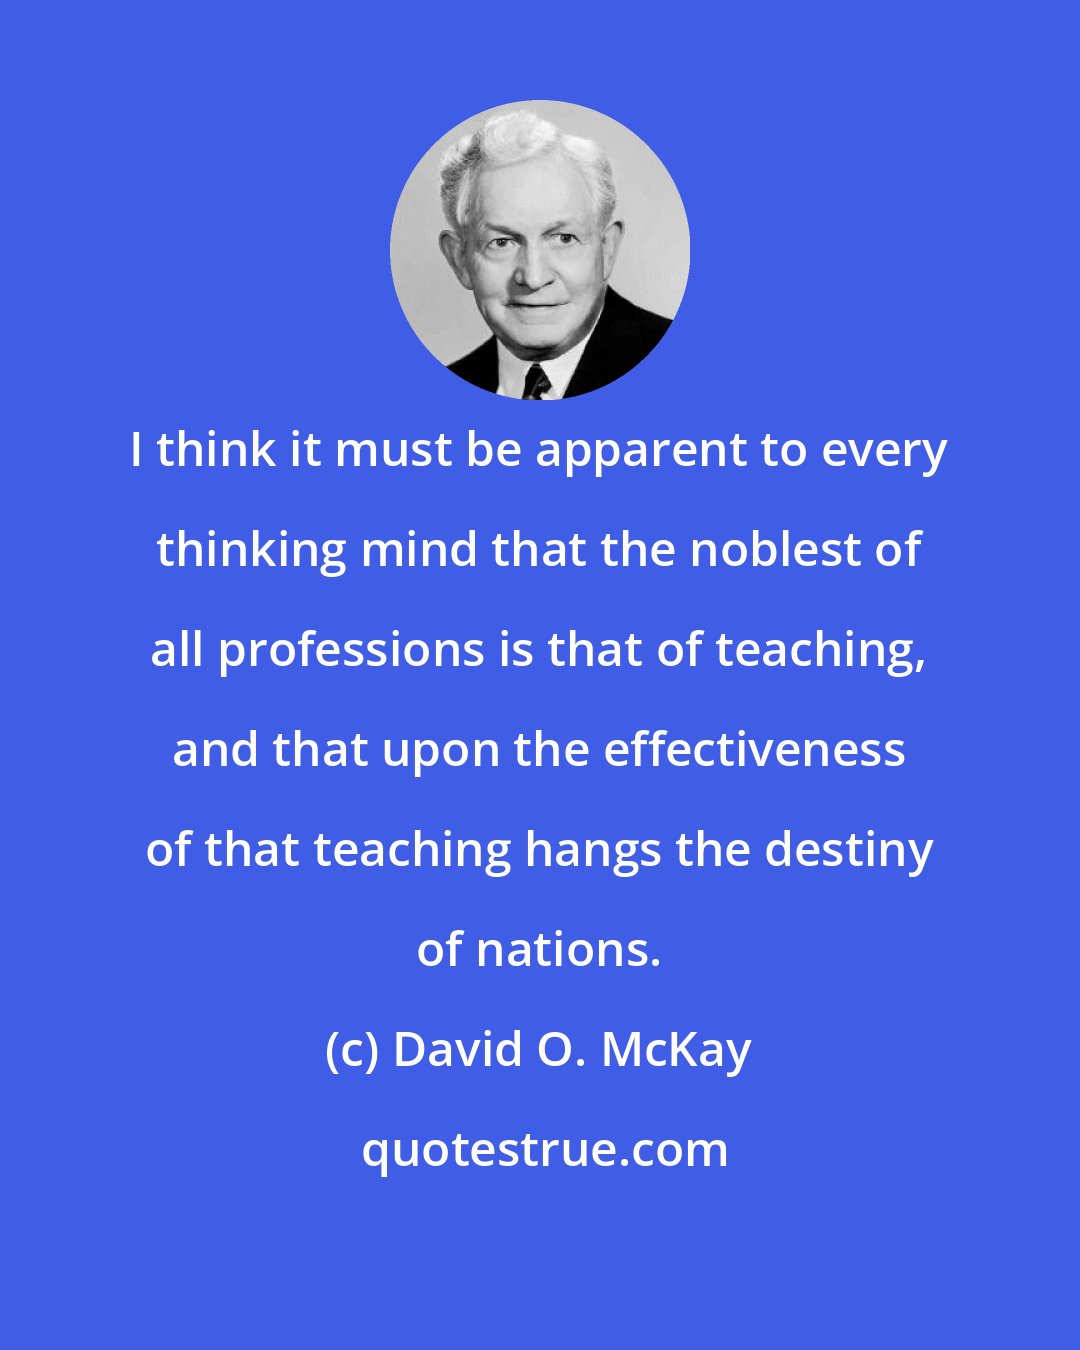 David O. McKay: I think it must be apparent to every thinking mind that the noblest of all professions is that of teaching, and that upon the effectiveness of that teaching hangs the destiny of nations.